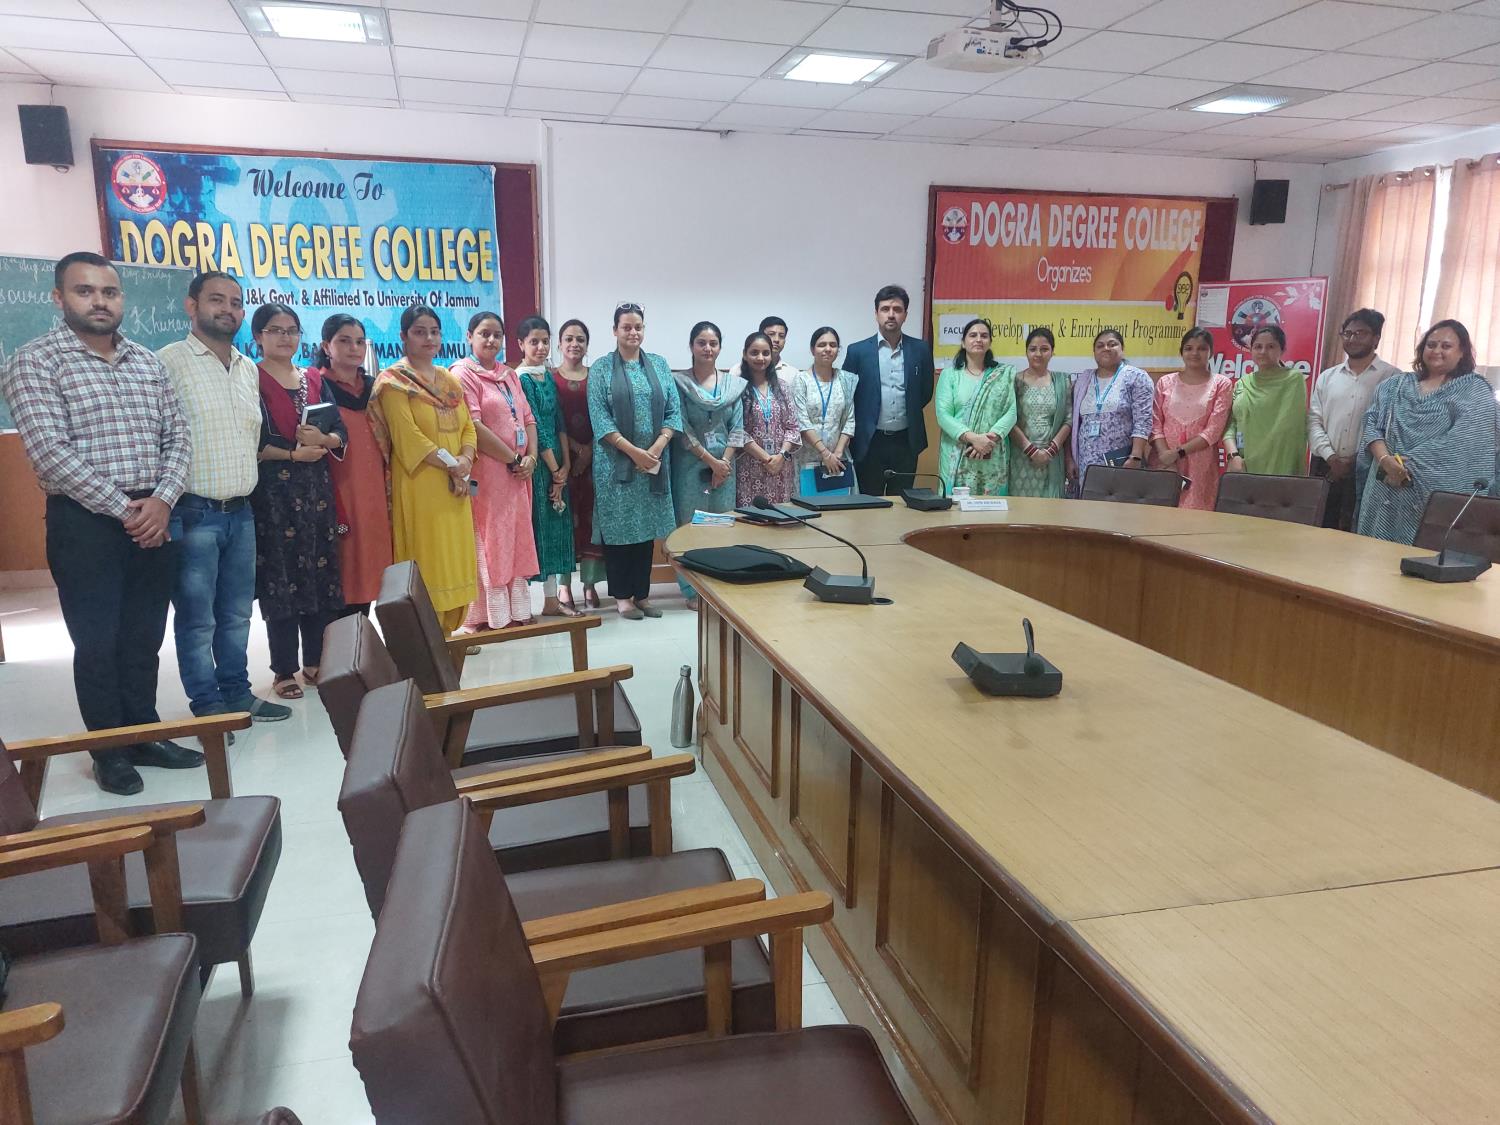 Dogra degree college organise faculty kbnowledge sharing program on "Data analysis using excel, SPSS and r